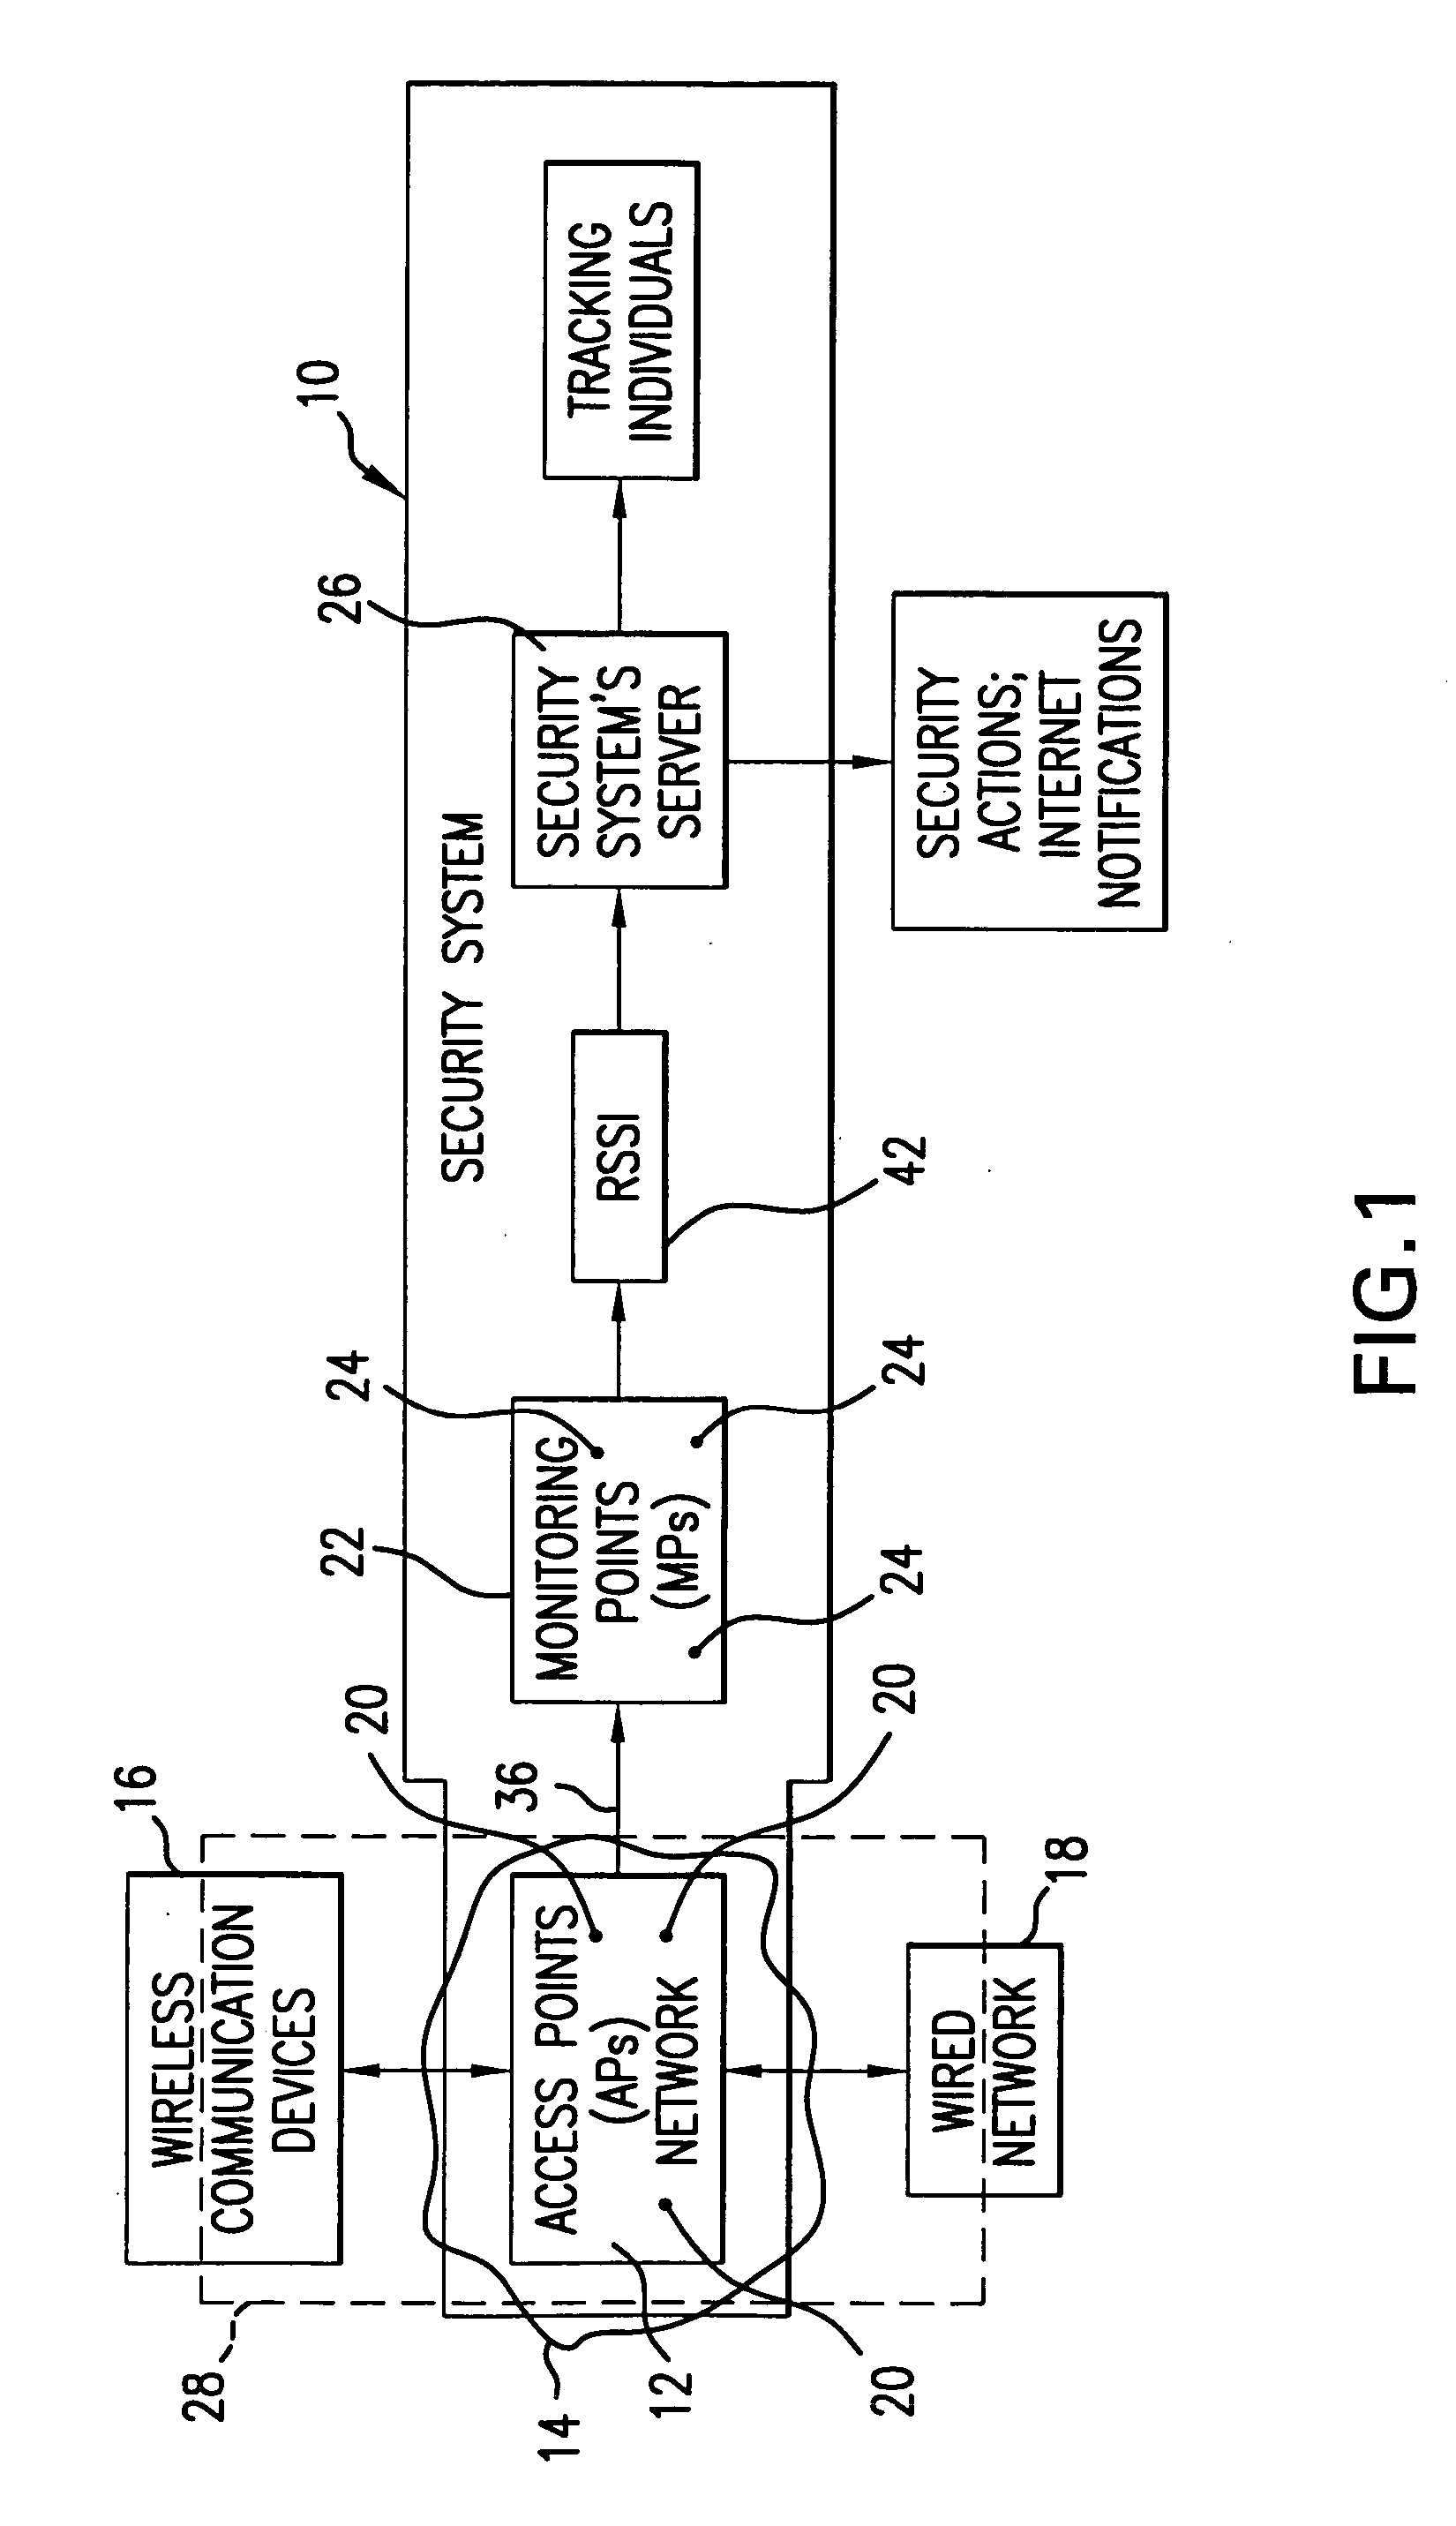 Method and system for providing physical security in an area of interest